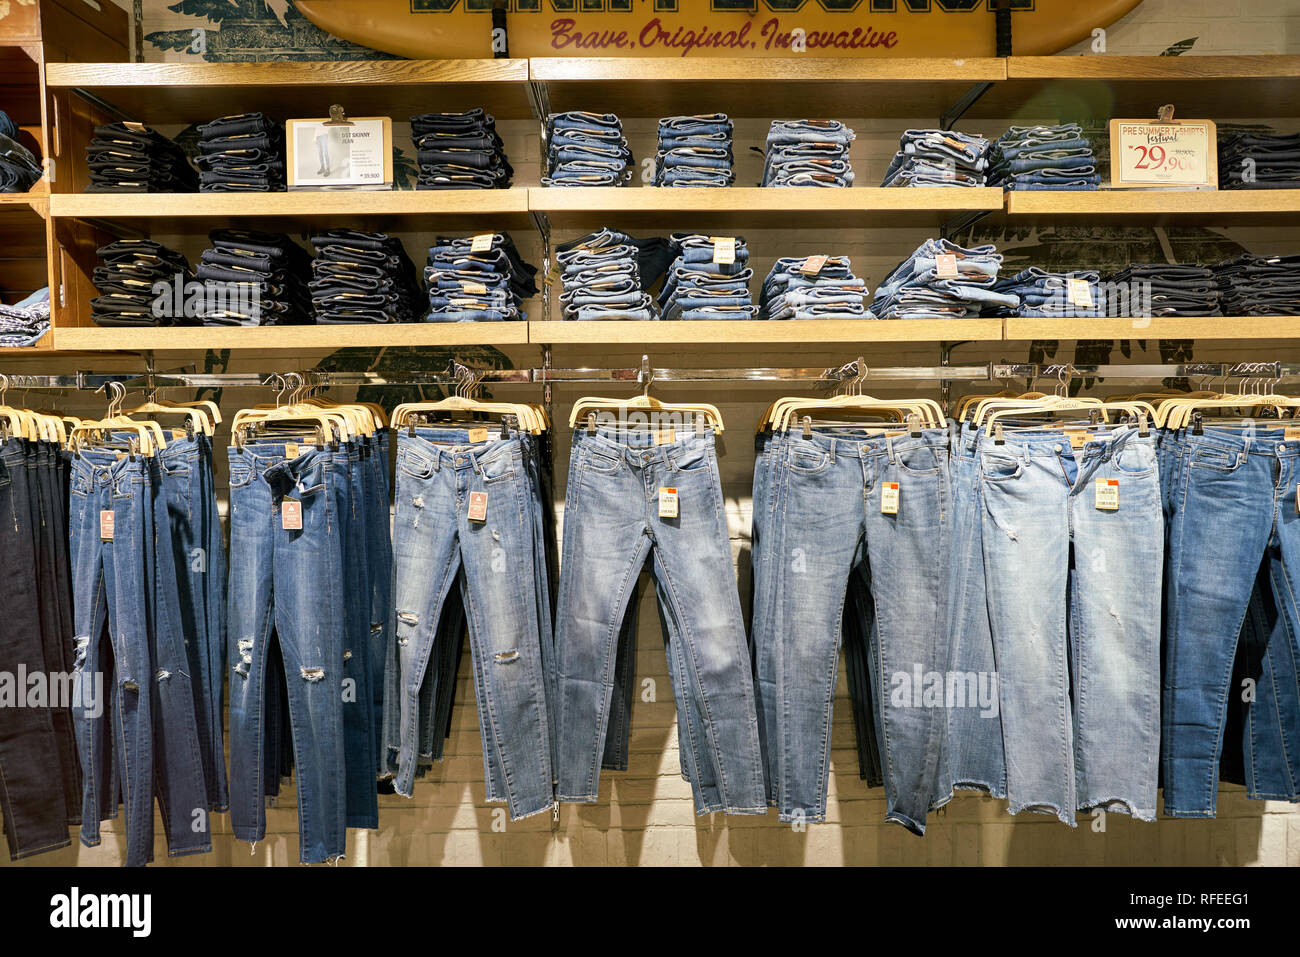 Jeans On Display High Resolution Stock Photography and Images - Alamy